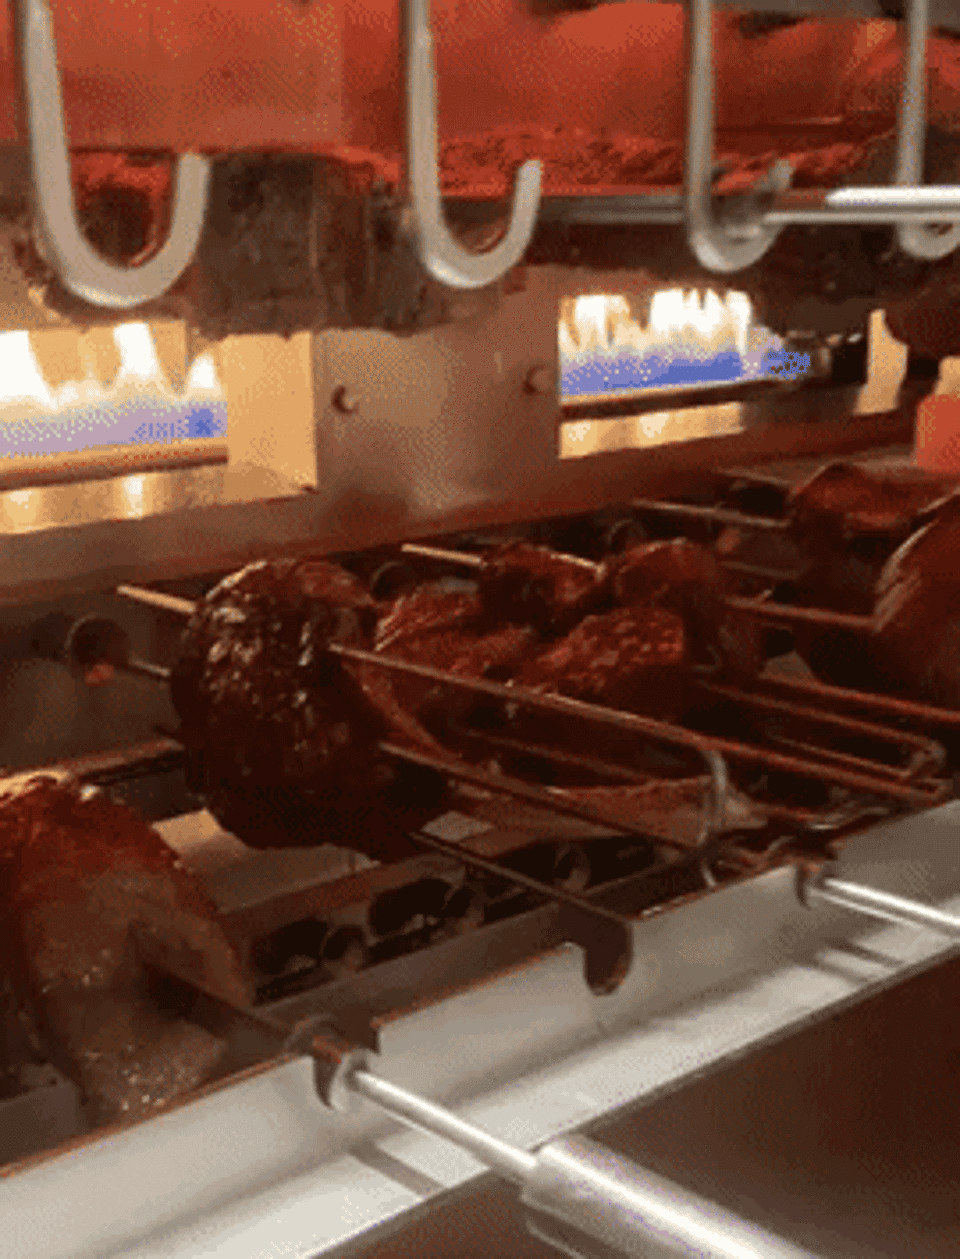 Meats rotating on the rotisserie